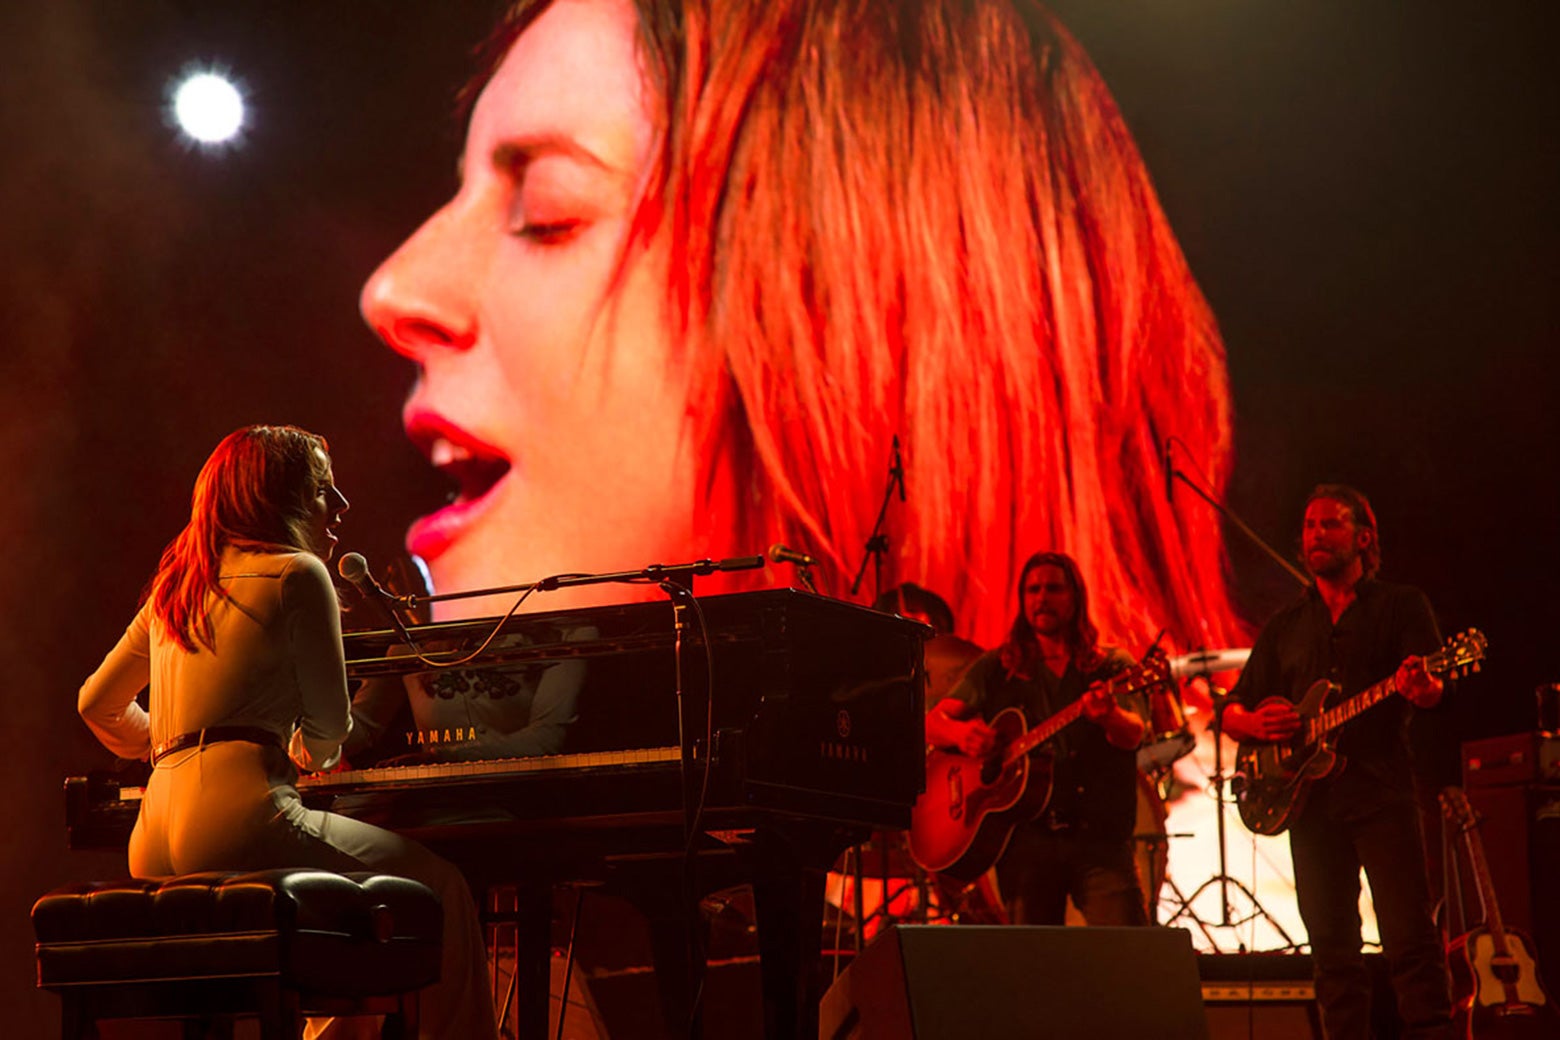 Lady Gaga at the piano and Bradley Cooper on guitar, performing on stage in A Star Is Born.